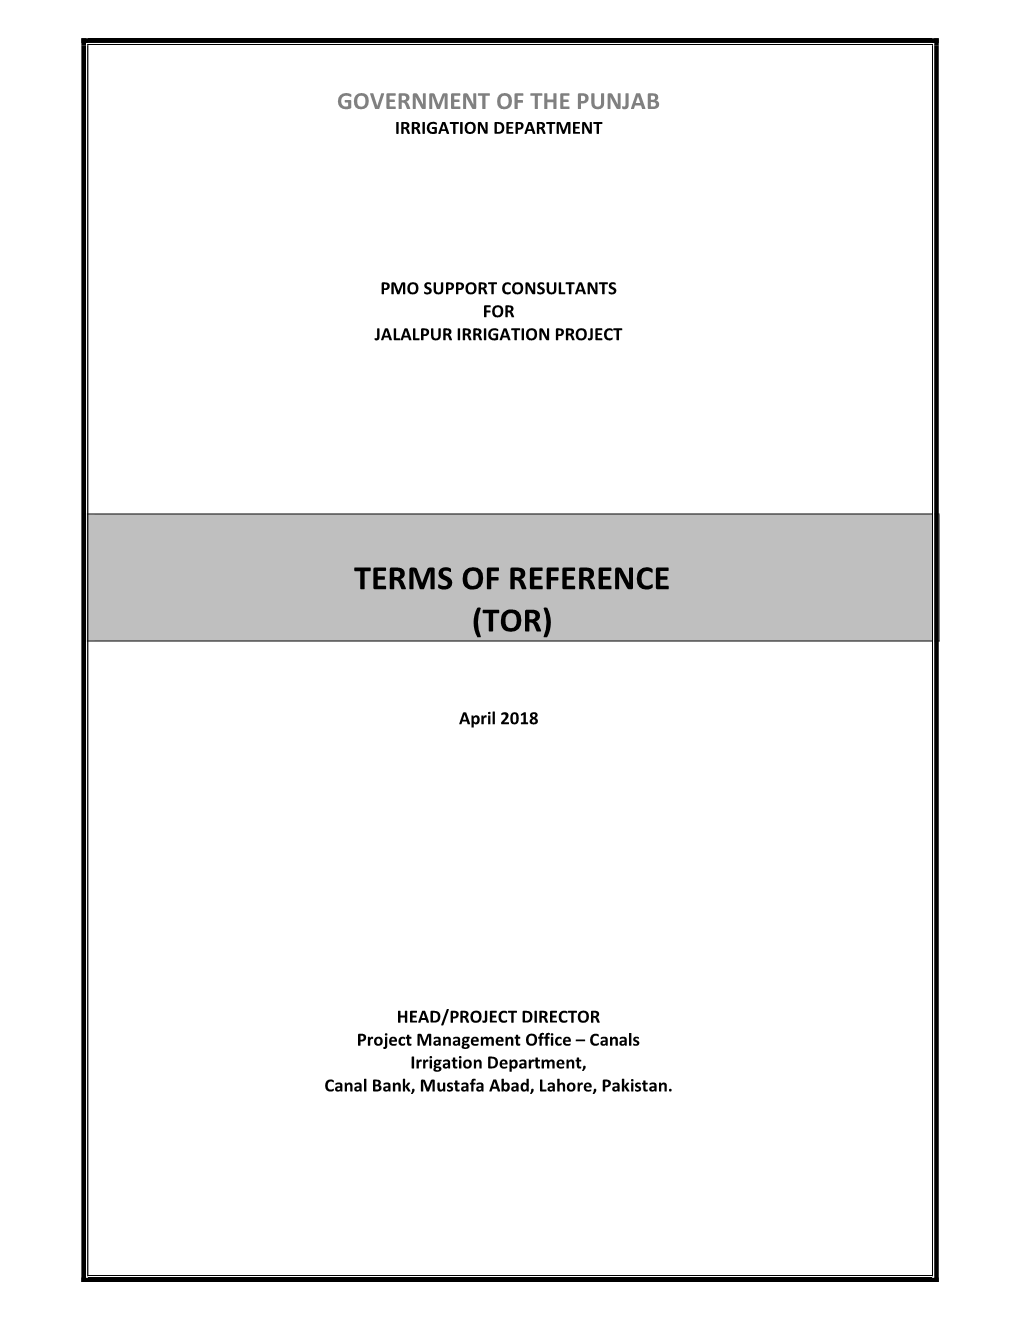 Terms of Reference (Tor)